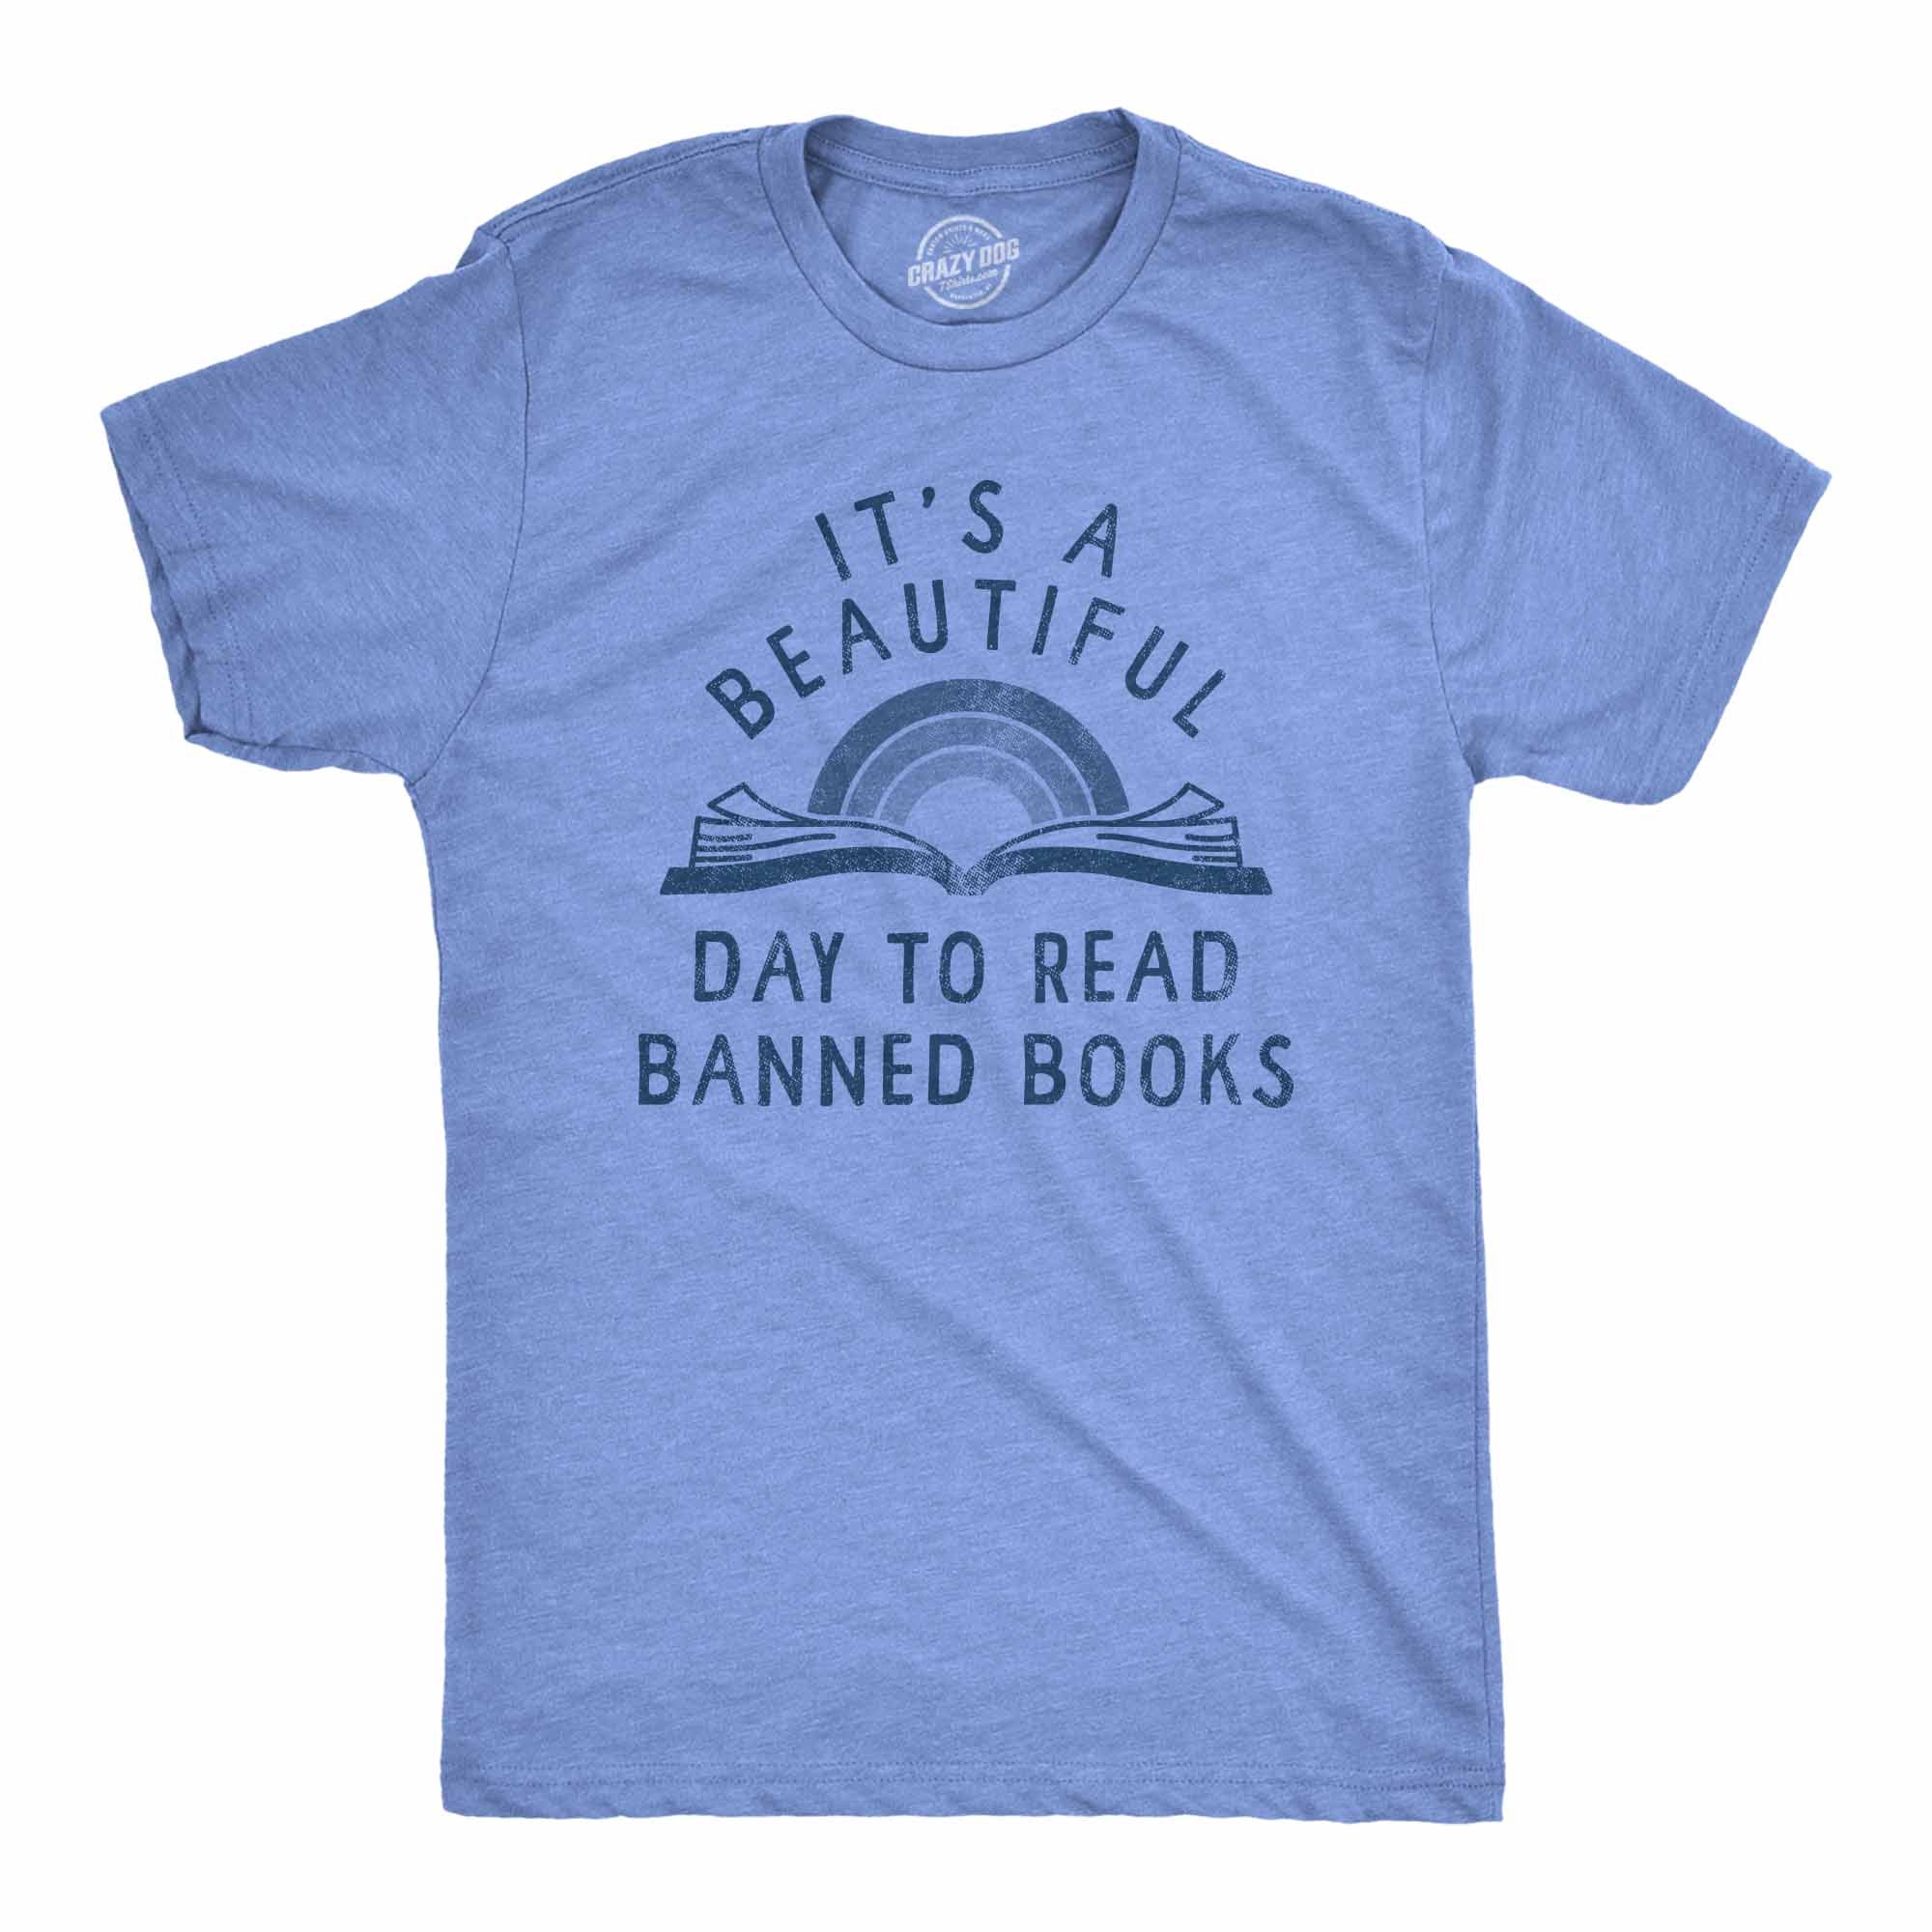 Funny Light Heather Blue - BANNED Its A Beautiful Day To Read Banned Books Mens T Shirt Nerdy Nerdy Tee